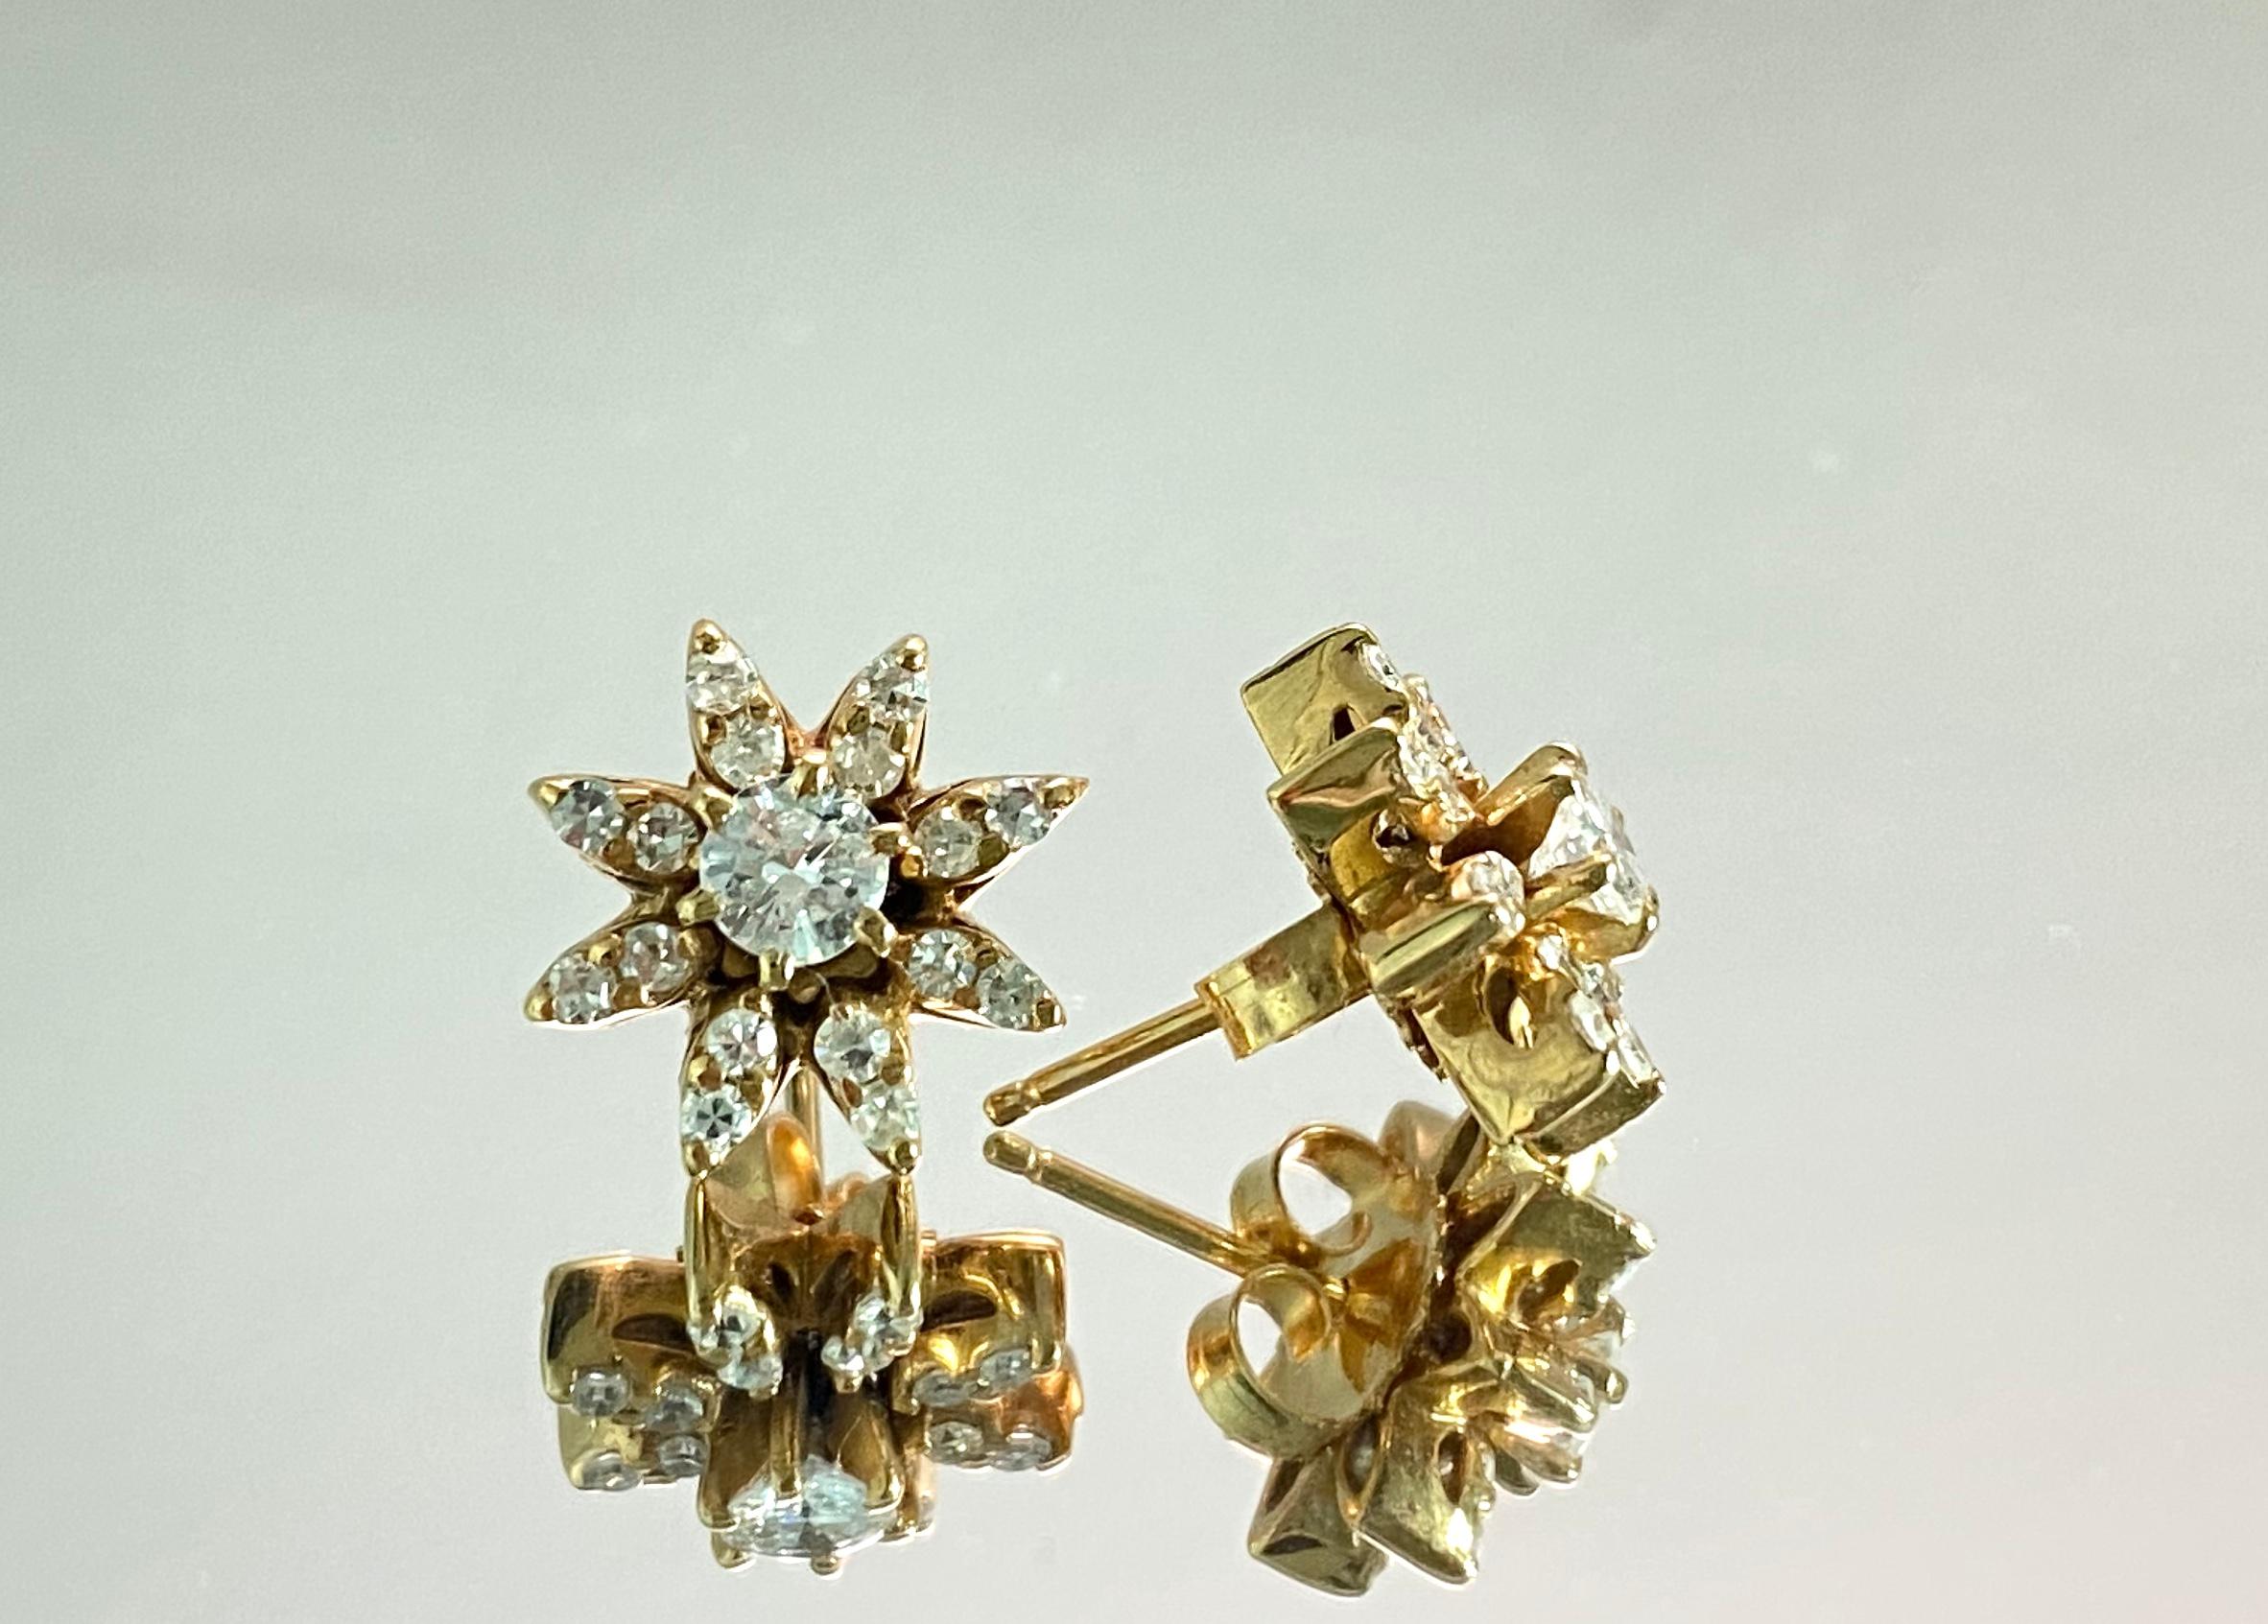 Metal: 14K yellow gold. 

1.00 carat diamonds total. VS clarity and G color diamond earrings. 100% natural earth mined diamonds. Round brilliant cut diamonds. 
All diamonds set in prong setting.

Butterfly push back 

